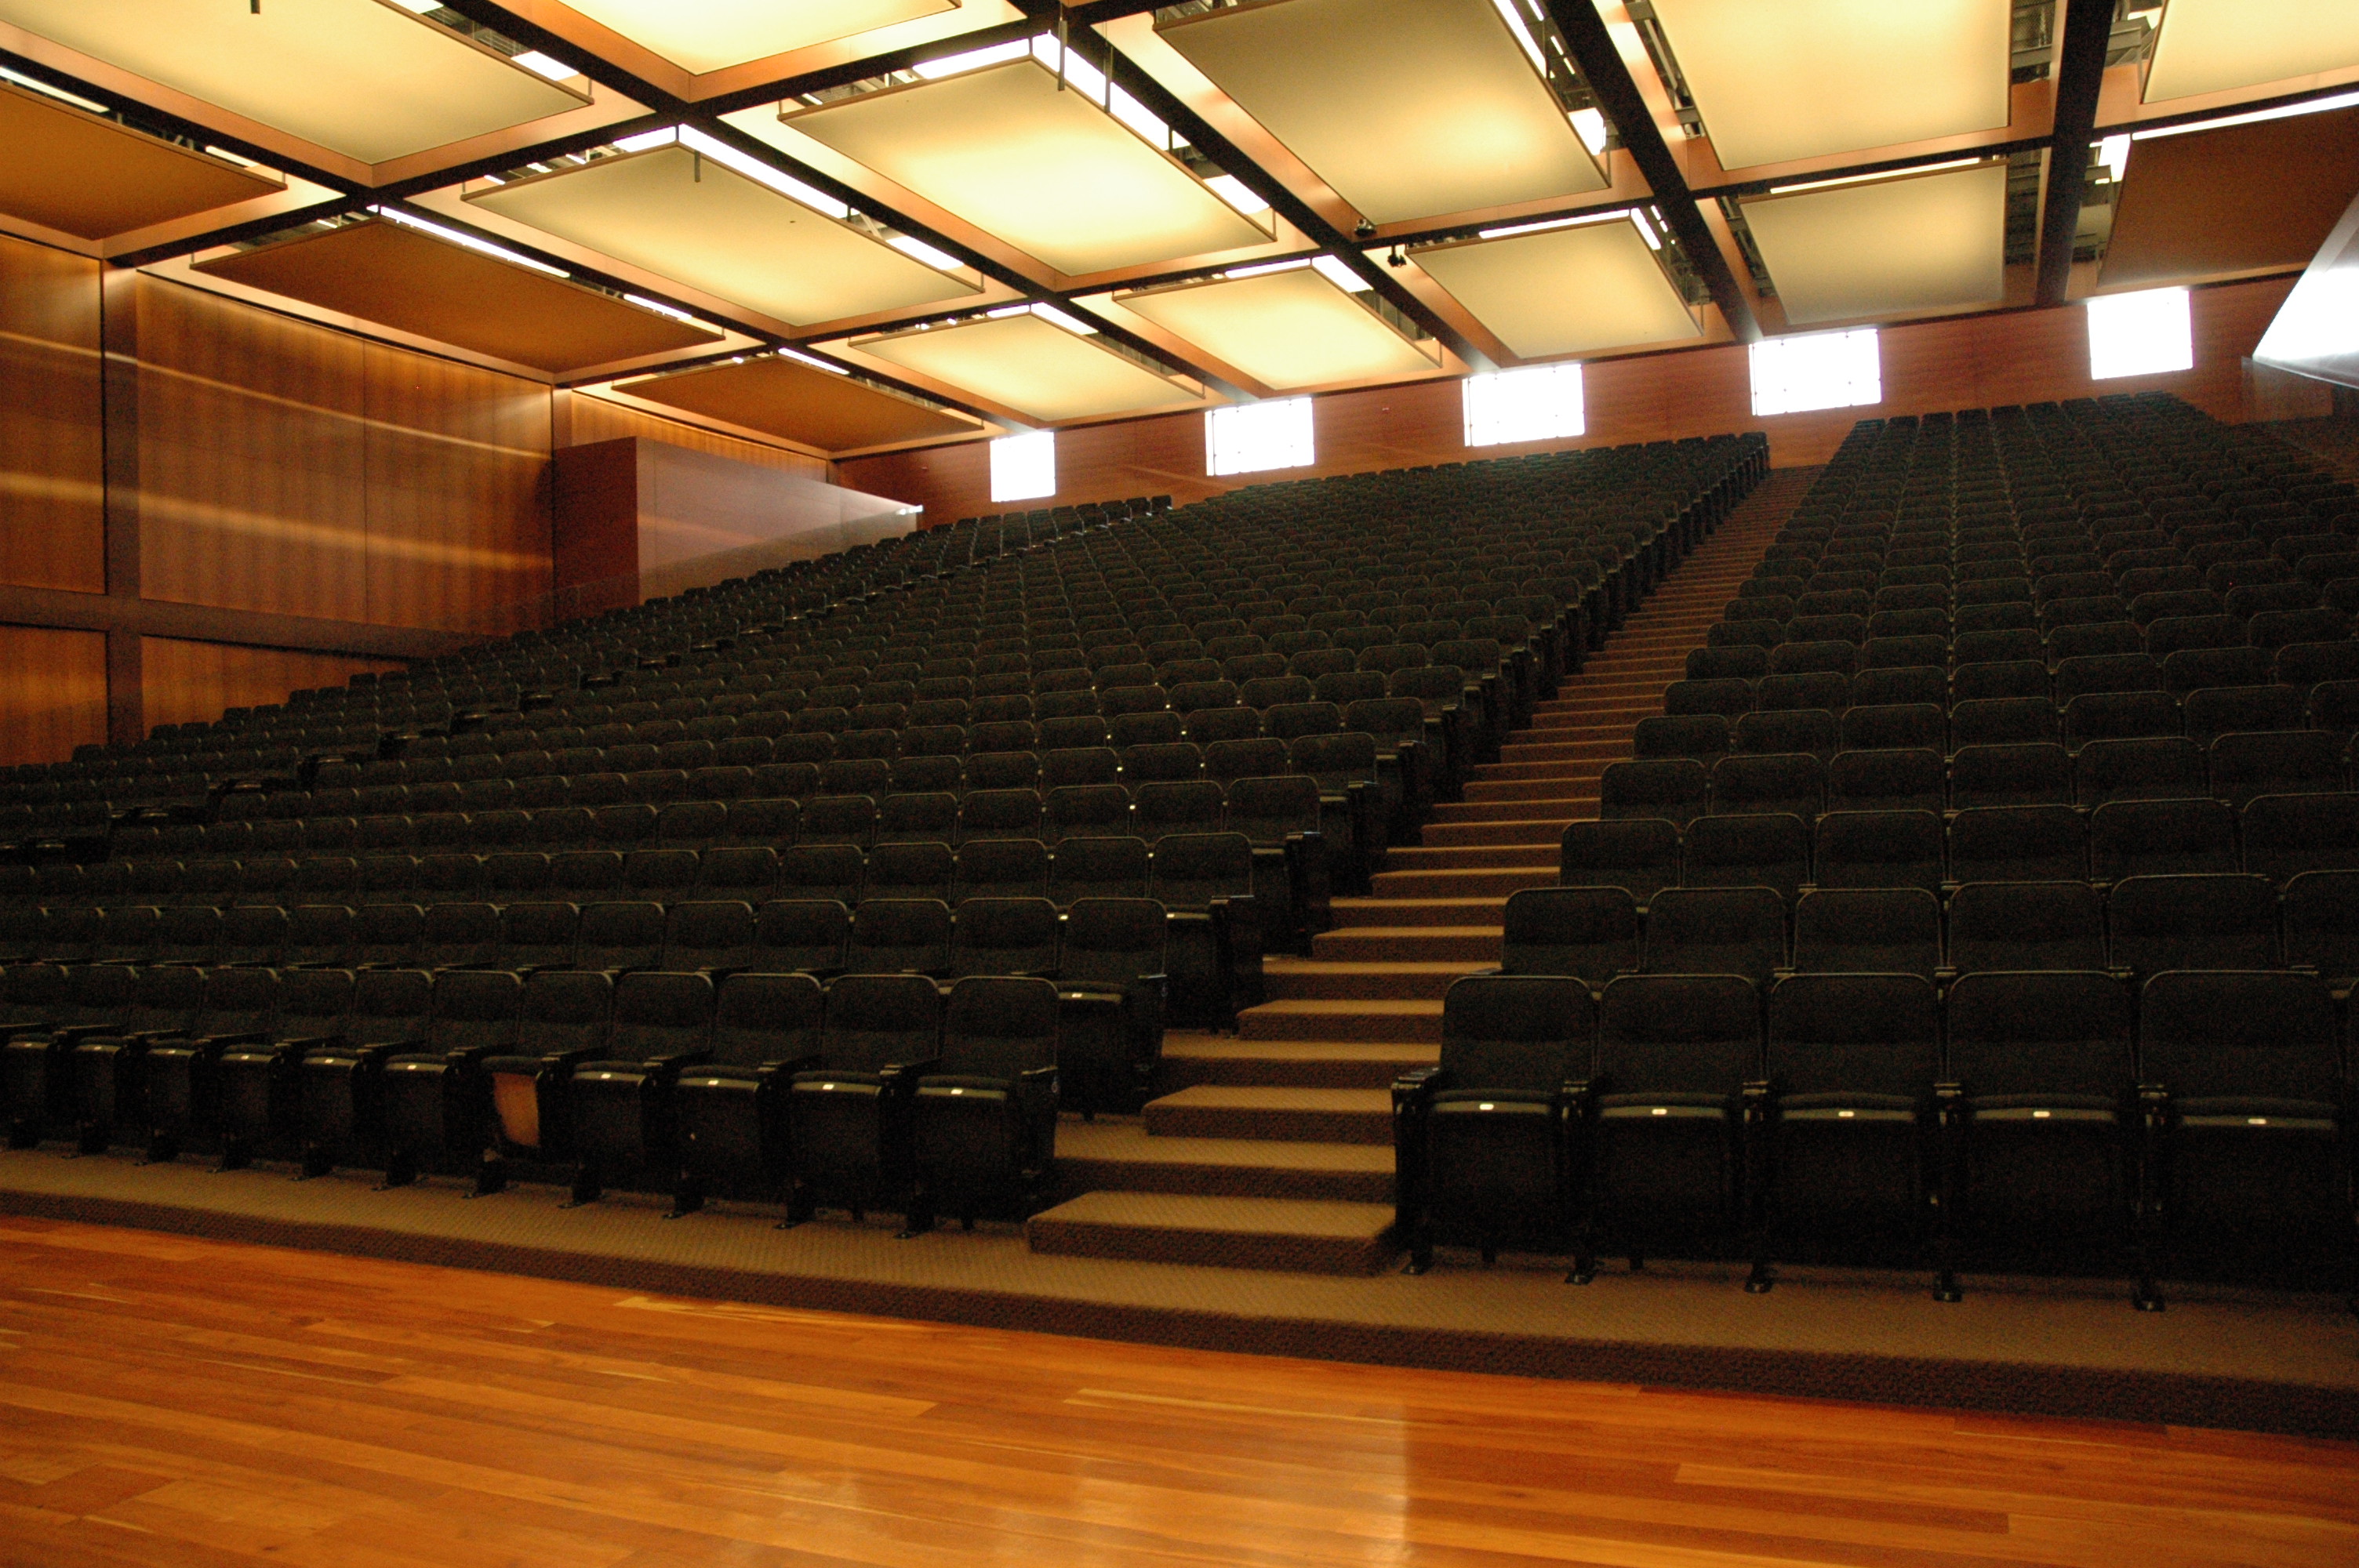 Bo Campbell from the front of the auditorium